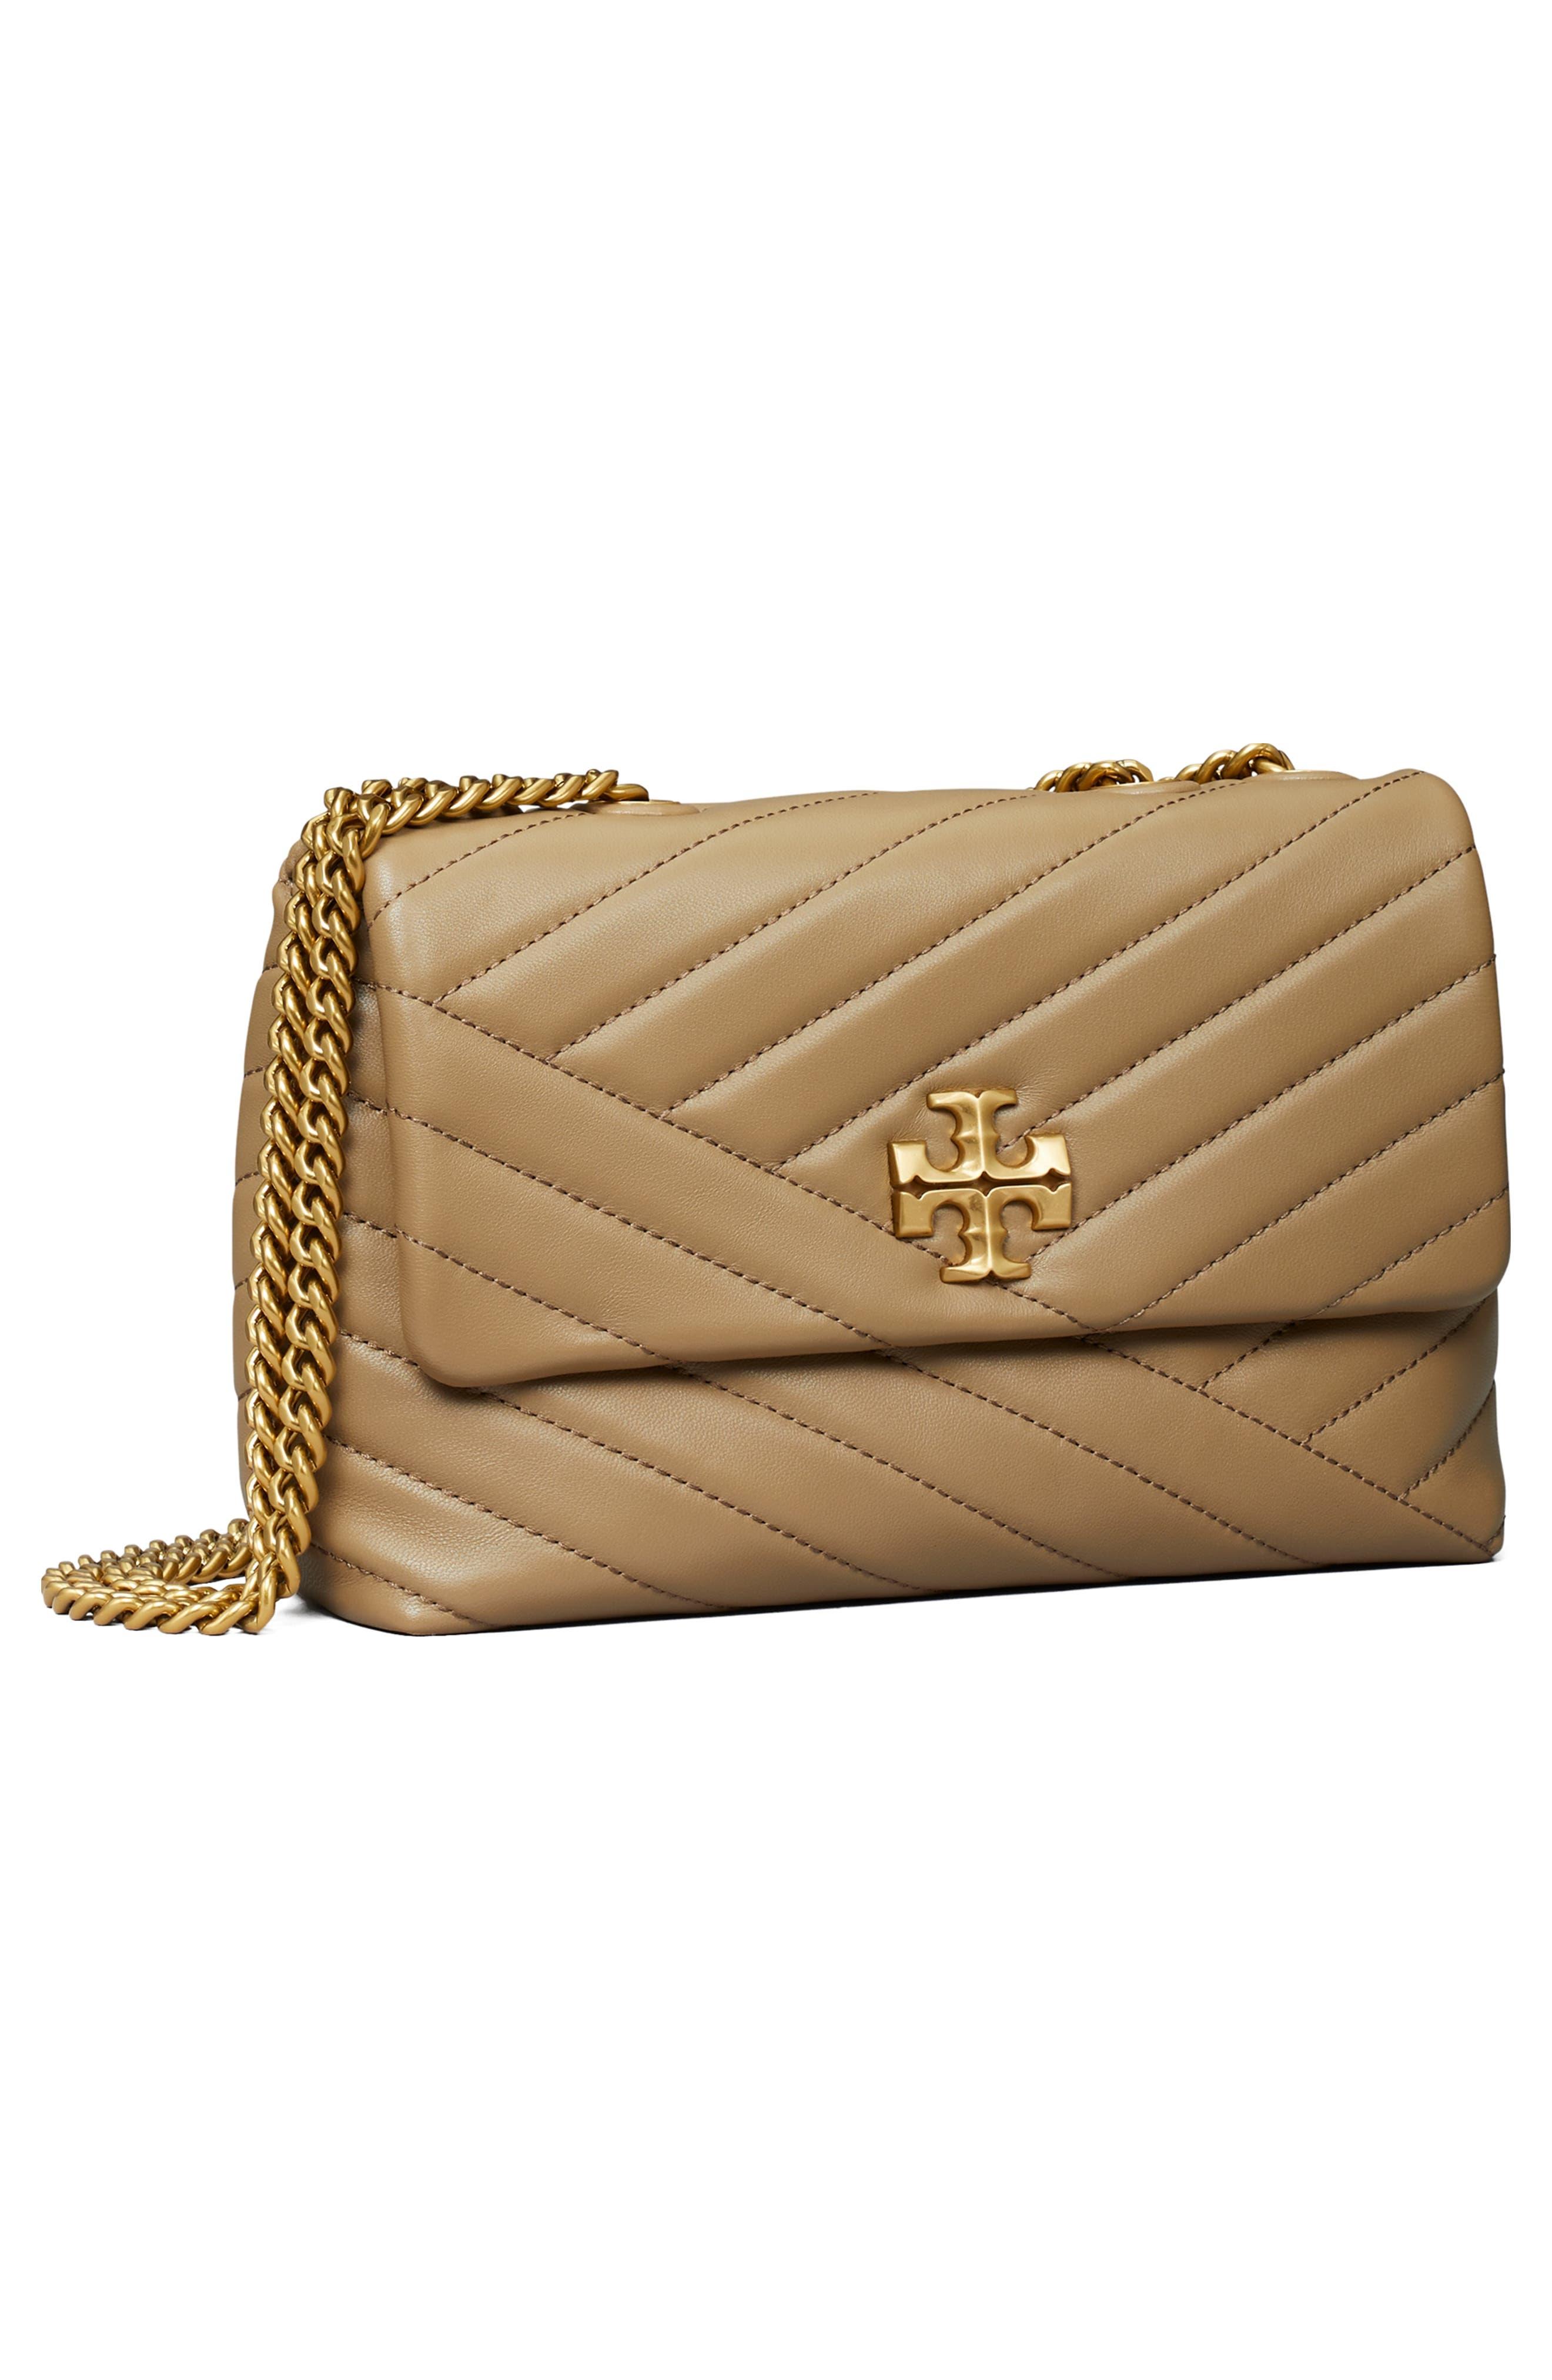 Tory Burch Small Kira Chevron Leather Convertible Shoulder Bag in Natural |  Lyst